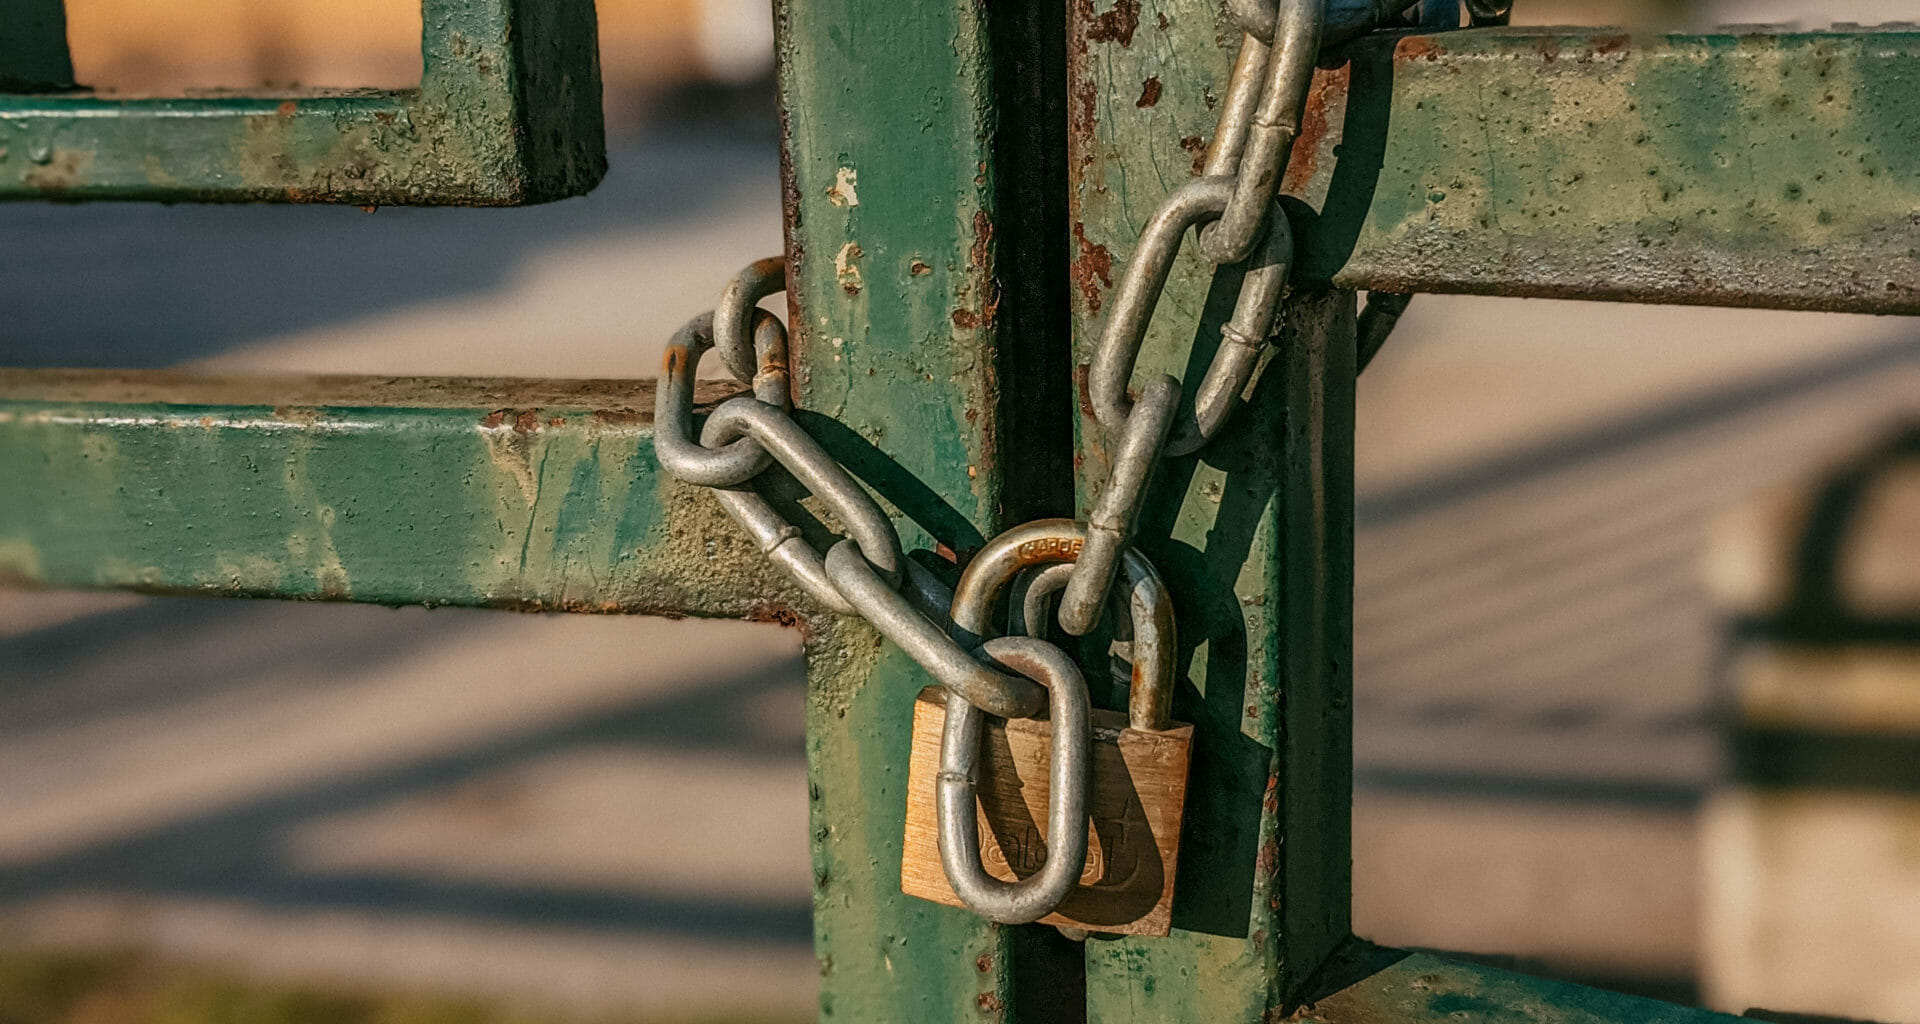 Locked gates and keep out signs: hundreds of access issues logged by councils 5